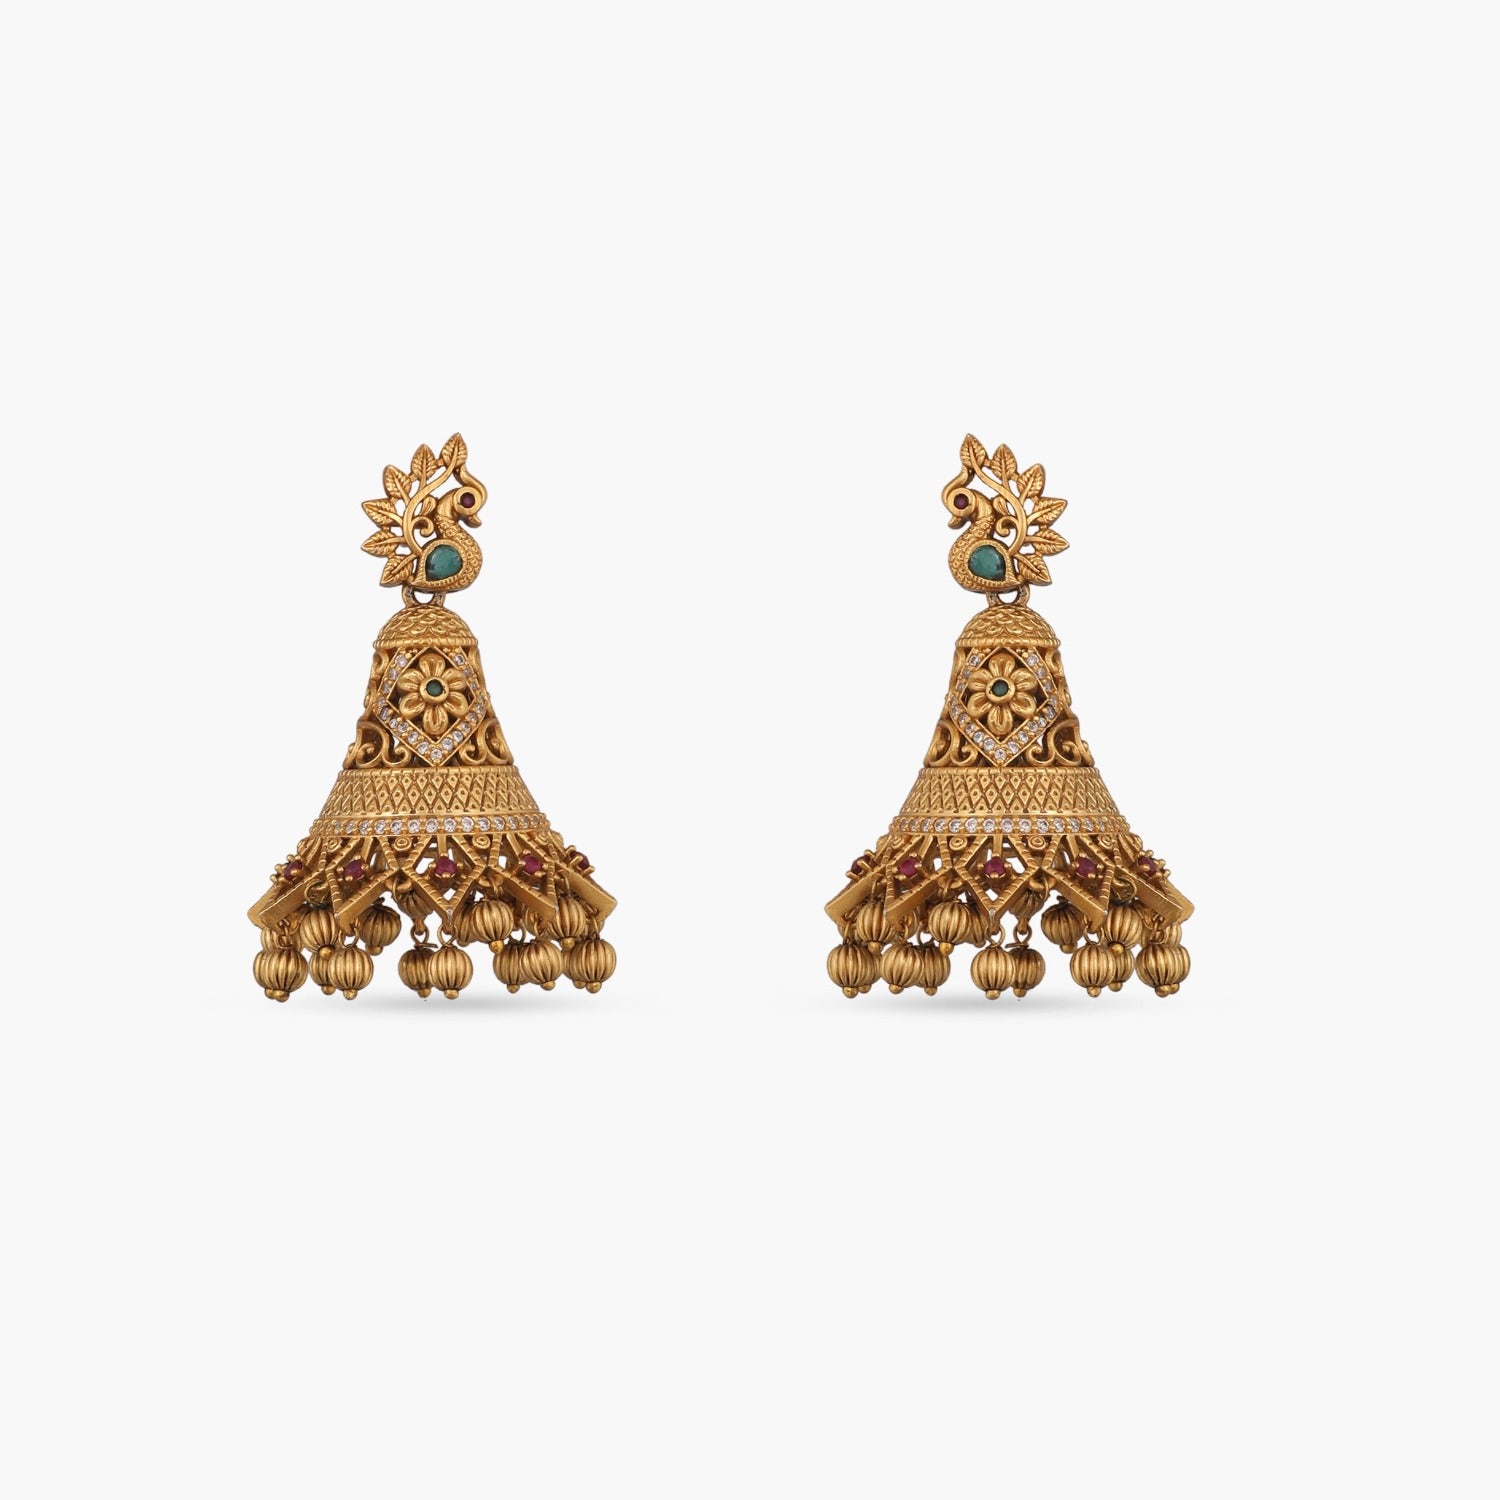 Buy Trendy Small Gold Earring Design Gold Plated Jewelry Online